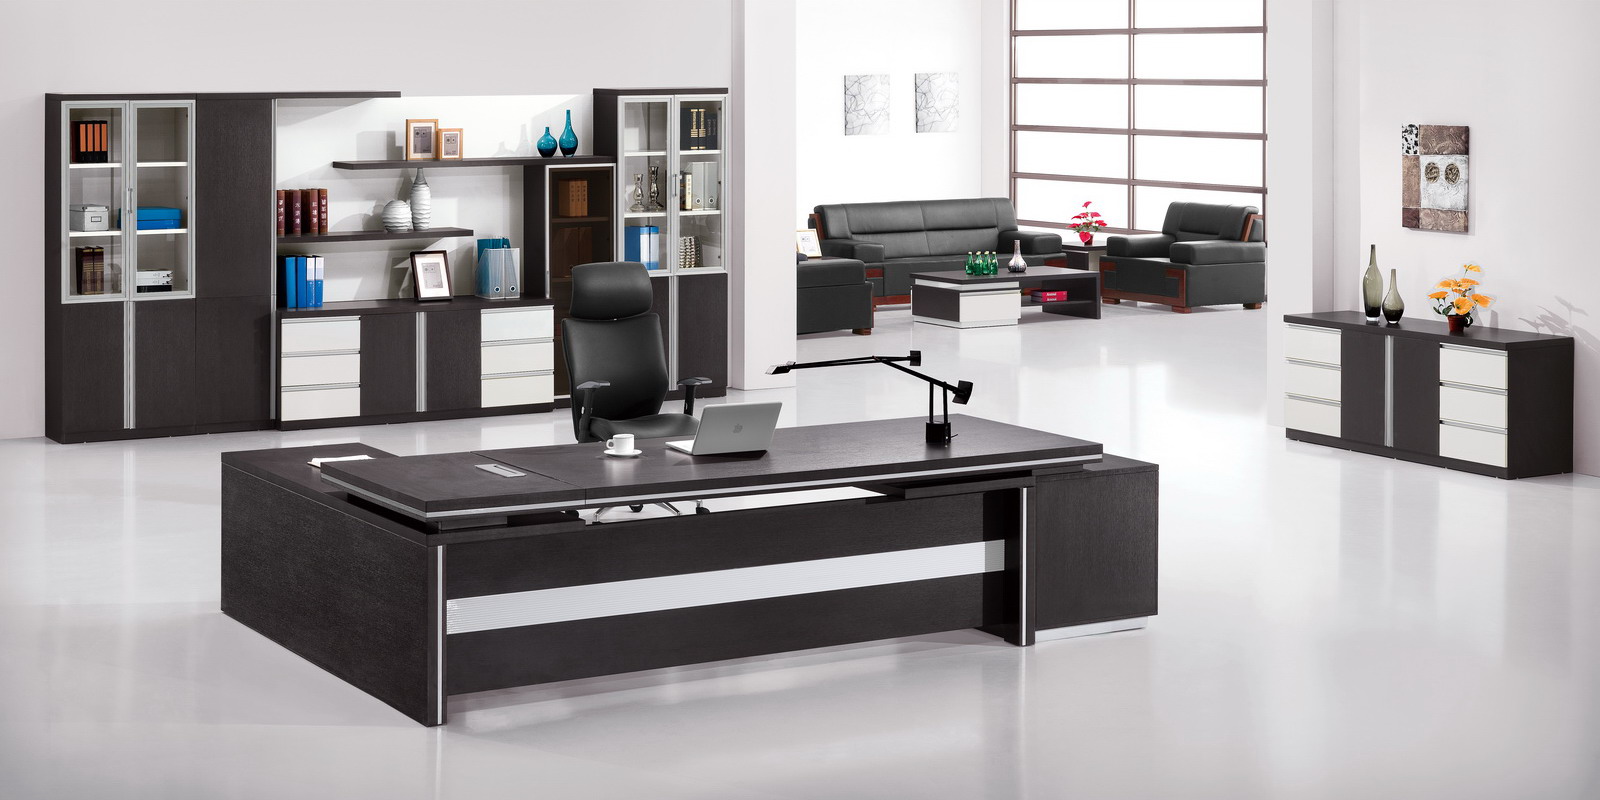 Furniture Needs In The Office OfficeScene